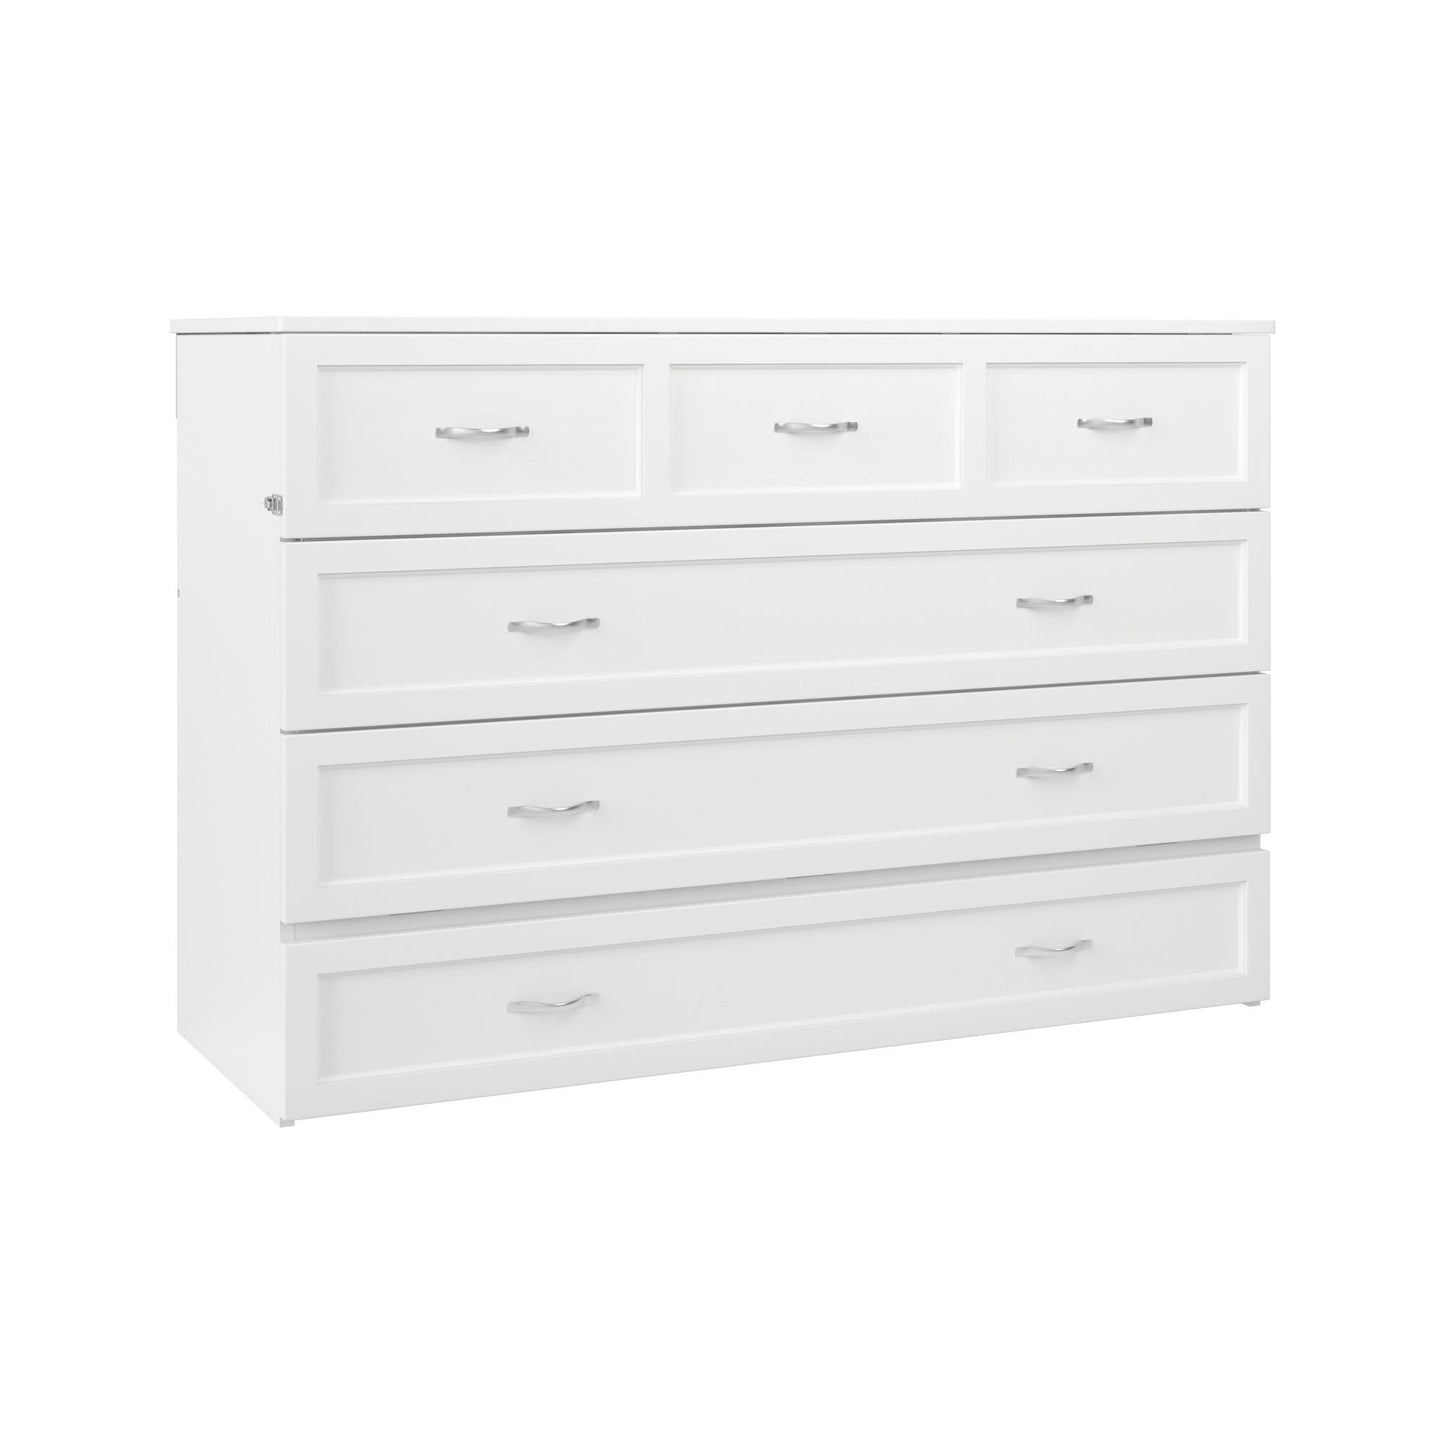 AFI Furnishings Northfield Queen Murphy Bed Chest White AC574142